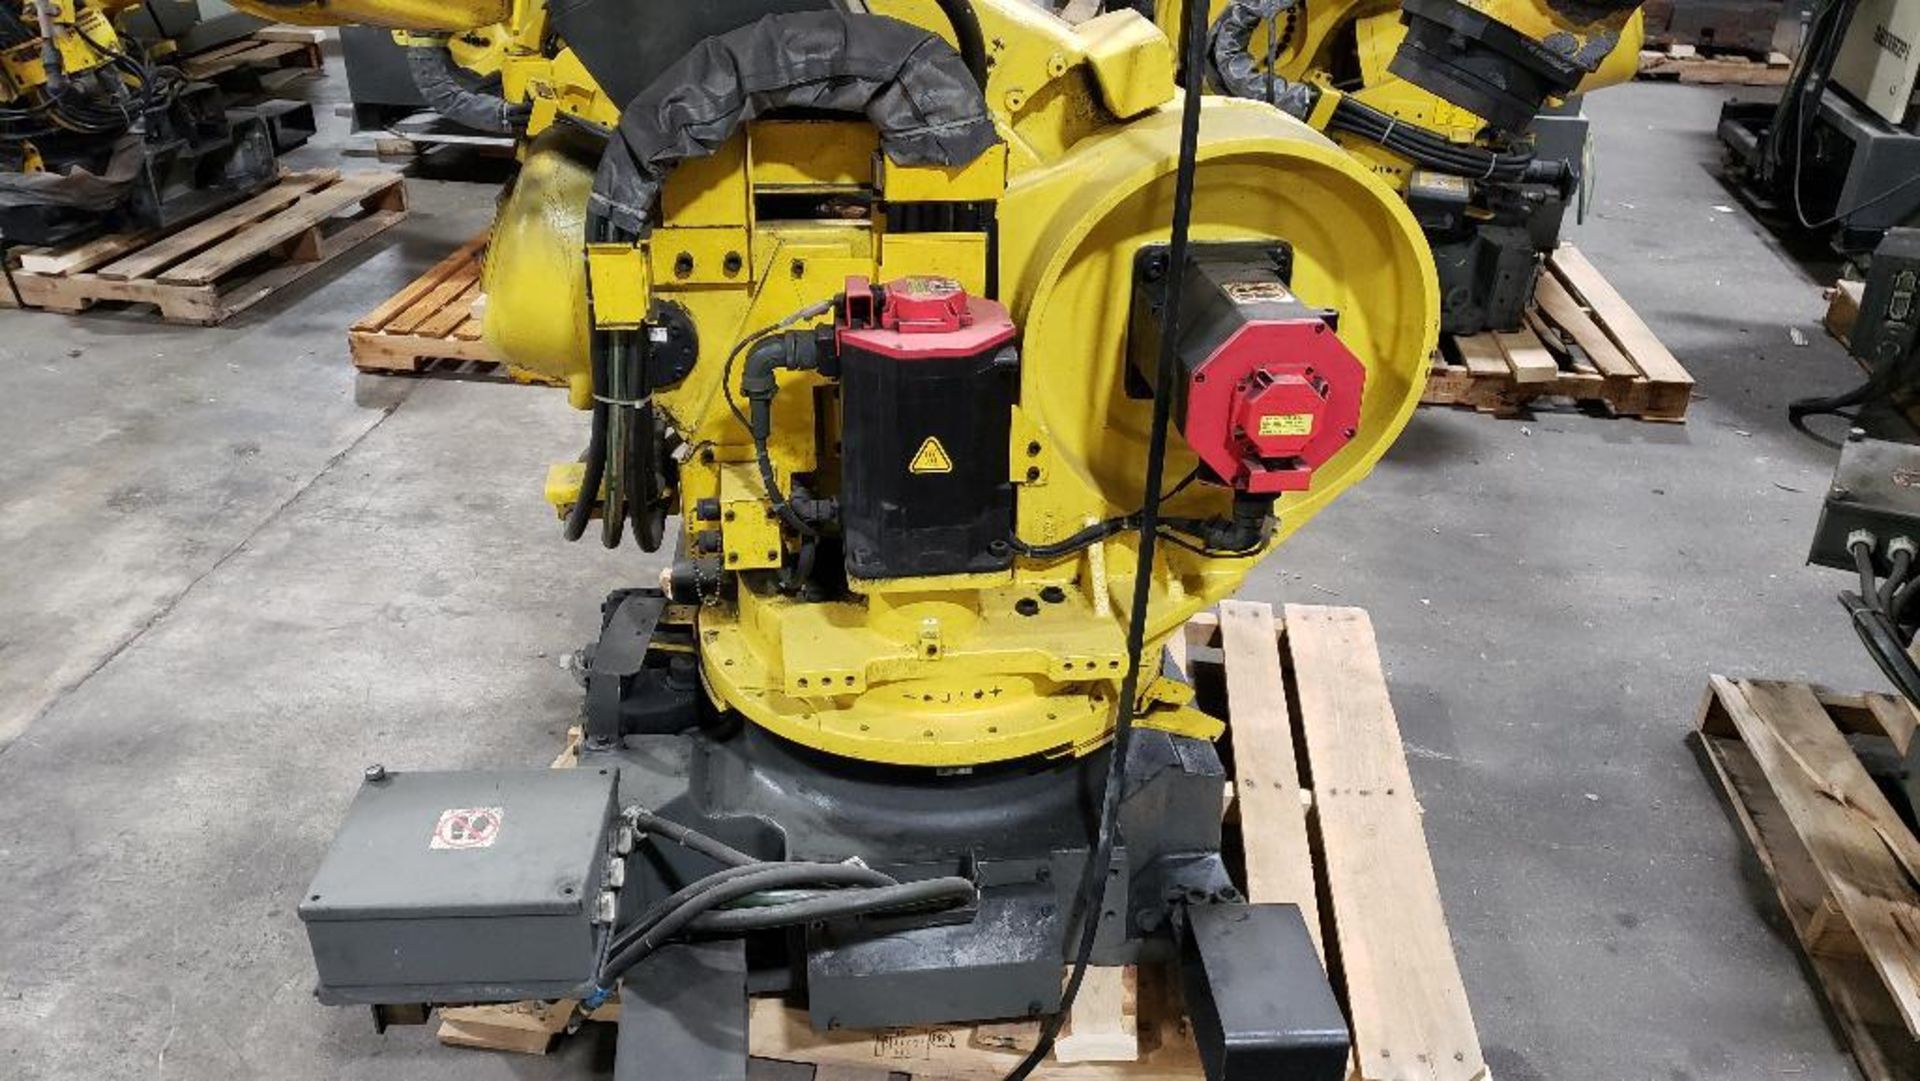 Fanuc R-2000iA/165F robot 6-axis arm. - Image 4 of 6